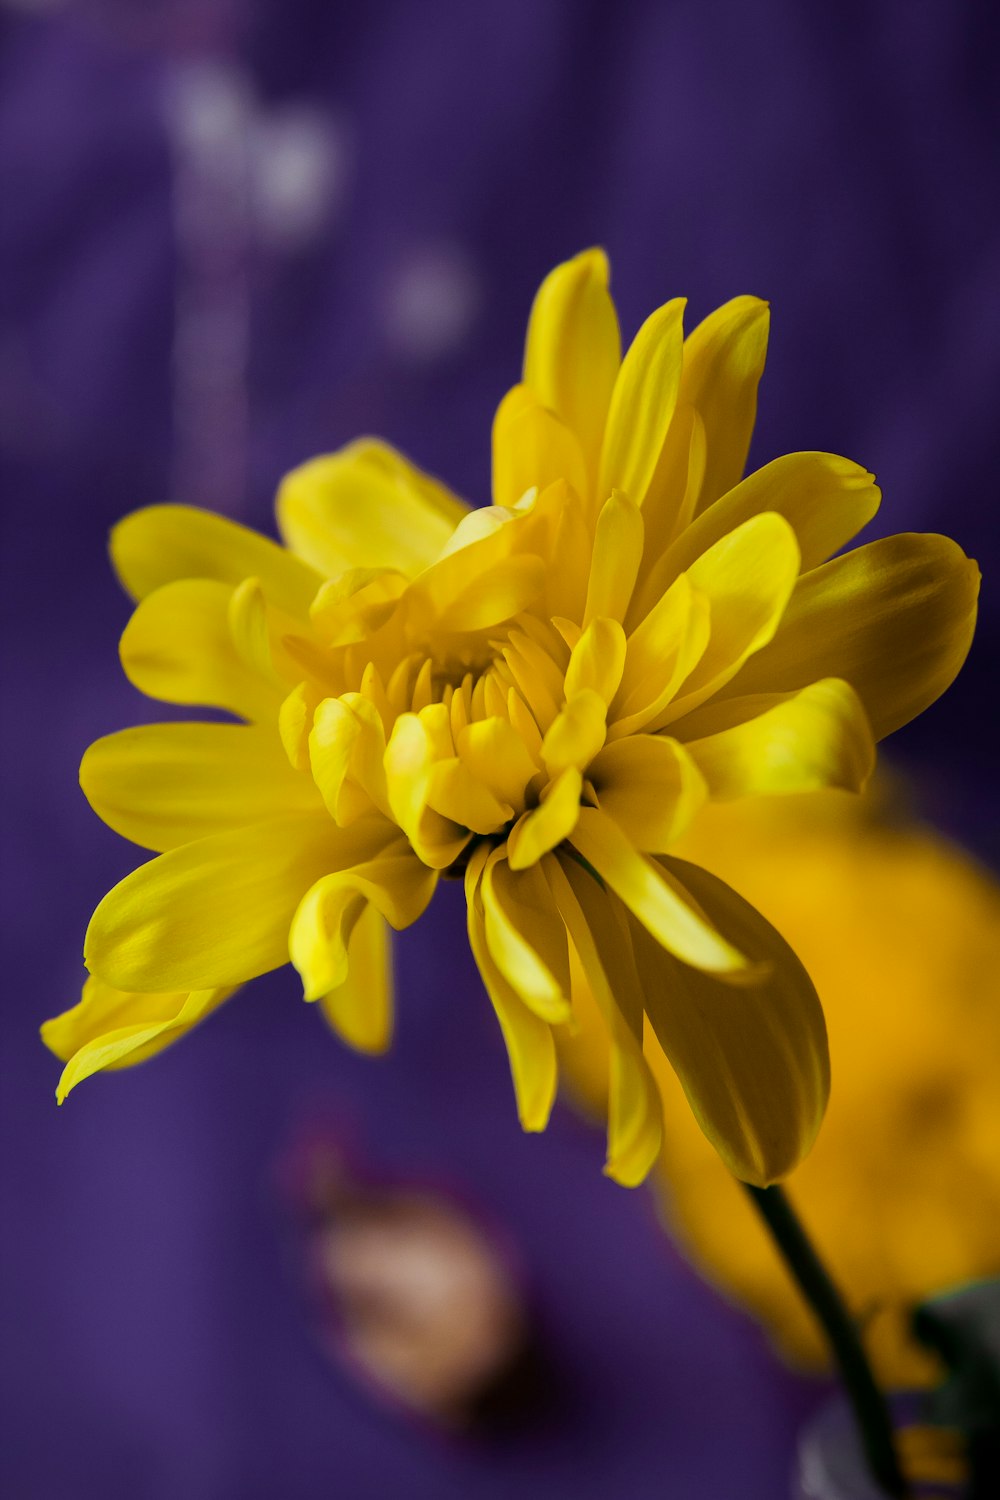 a close up of a yellow flower on a purple background